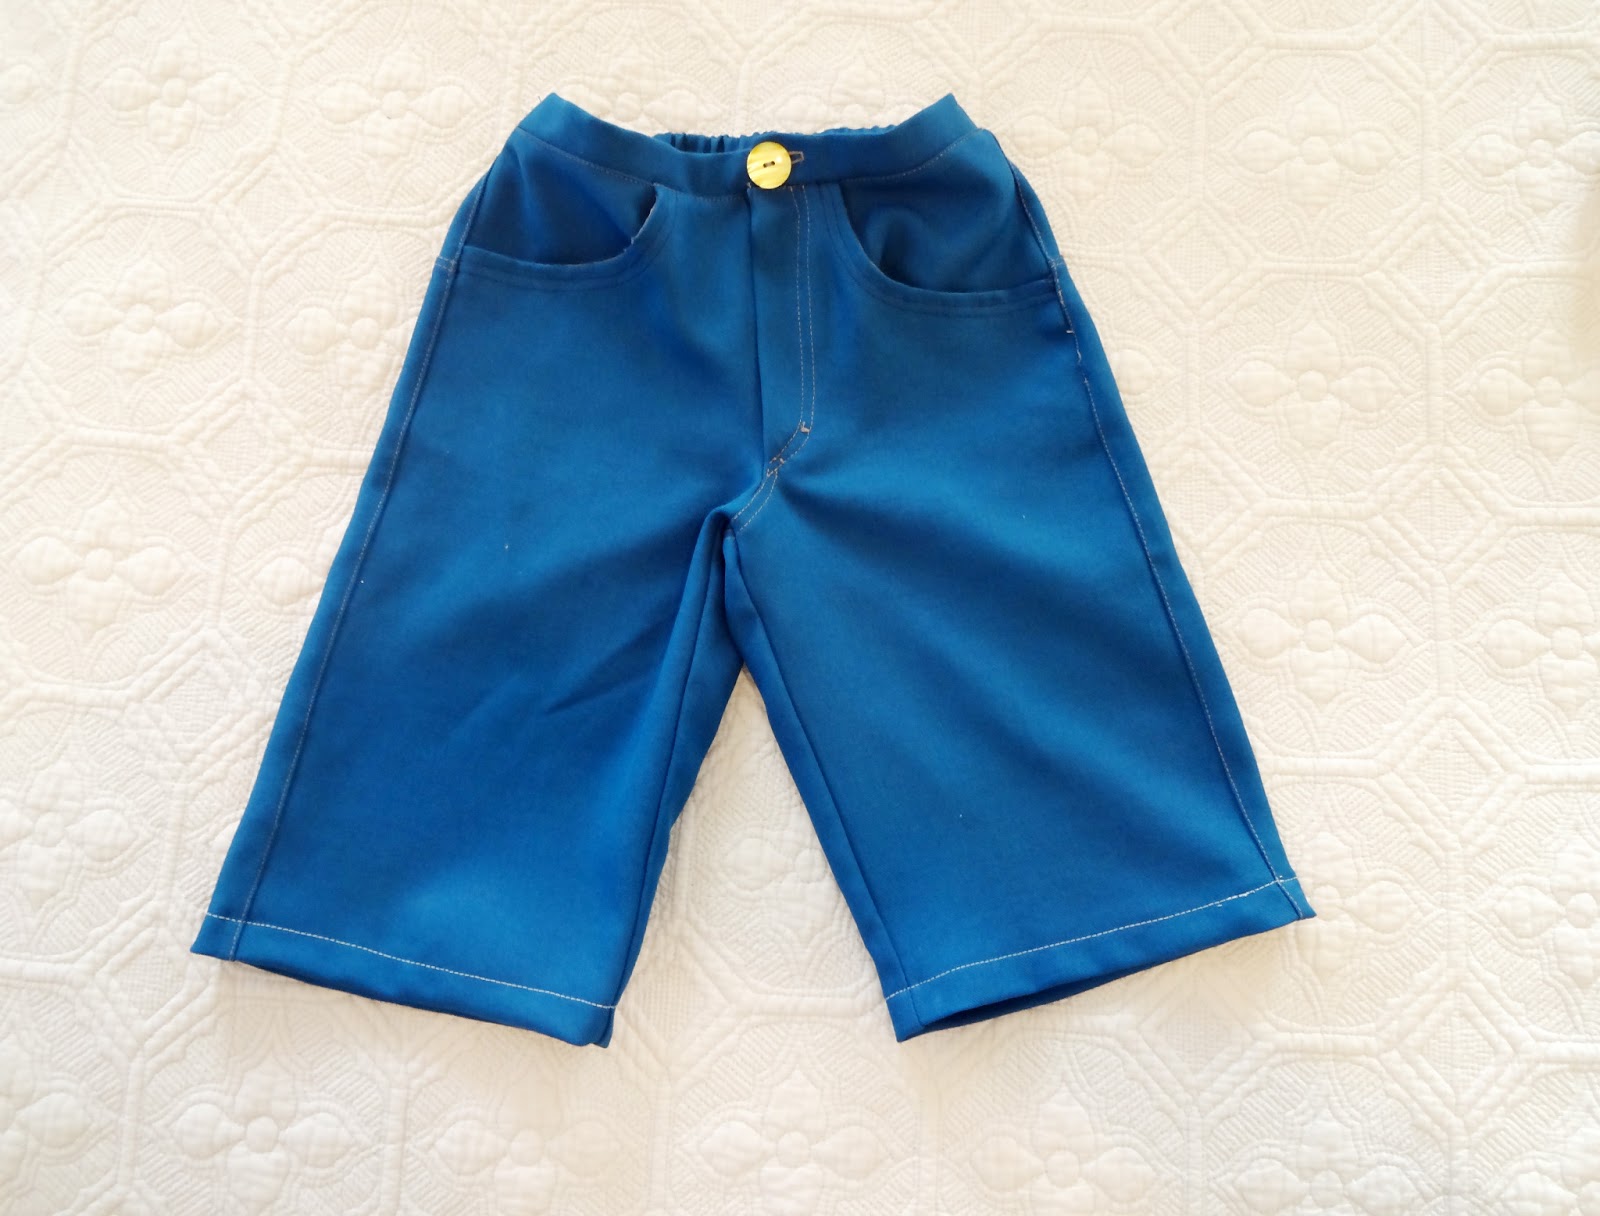 SeeMeSew: Blue Shorts and my 1st real zipper and fly